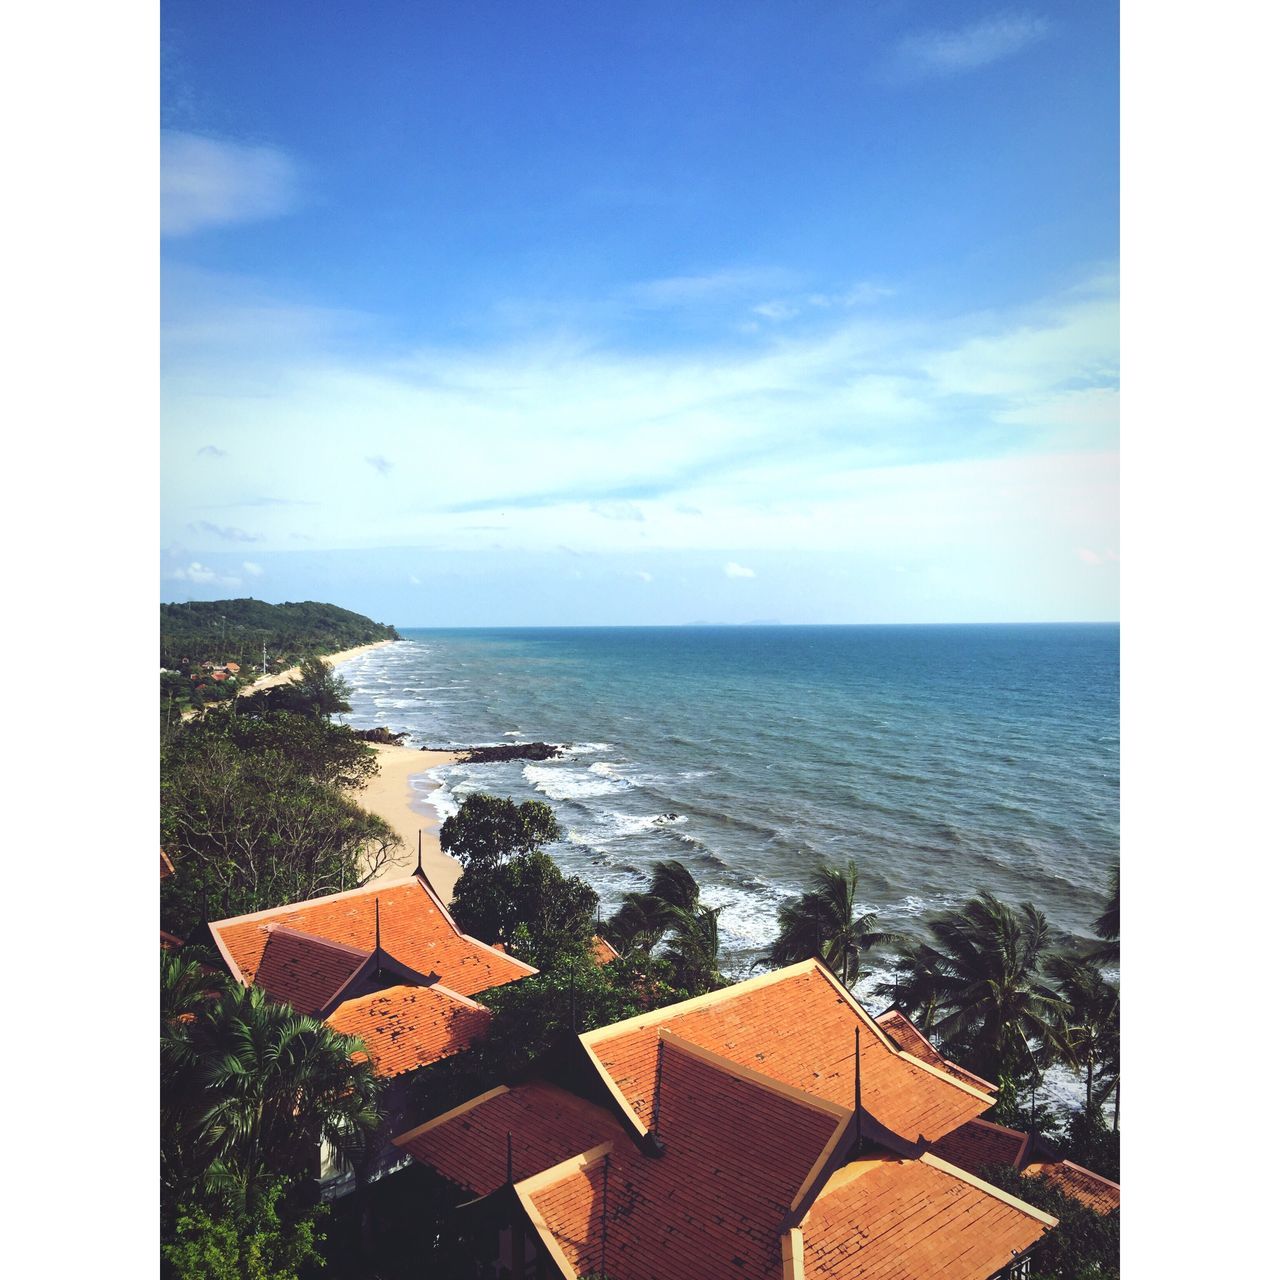 sea, horizon over water, water, auto post production filter, transfer print, architecture, built structure, blue, building exterior, sky, house, high angle view, tranquil scene, shore, scenics, beauty in nature, tranquility, roof, day, cloud, outdoors, nature, cloud - sky, ocean, no people, remote, town